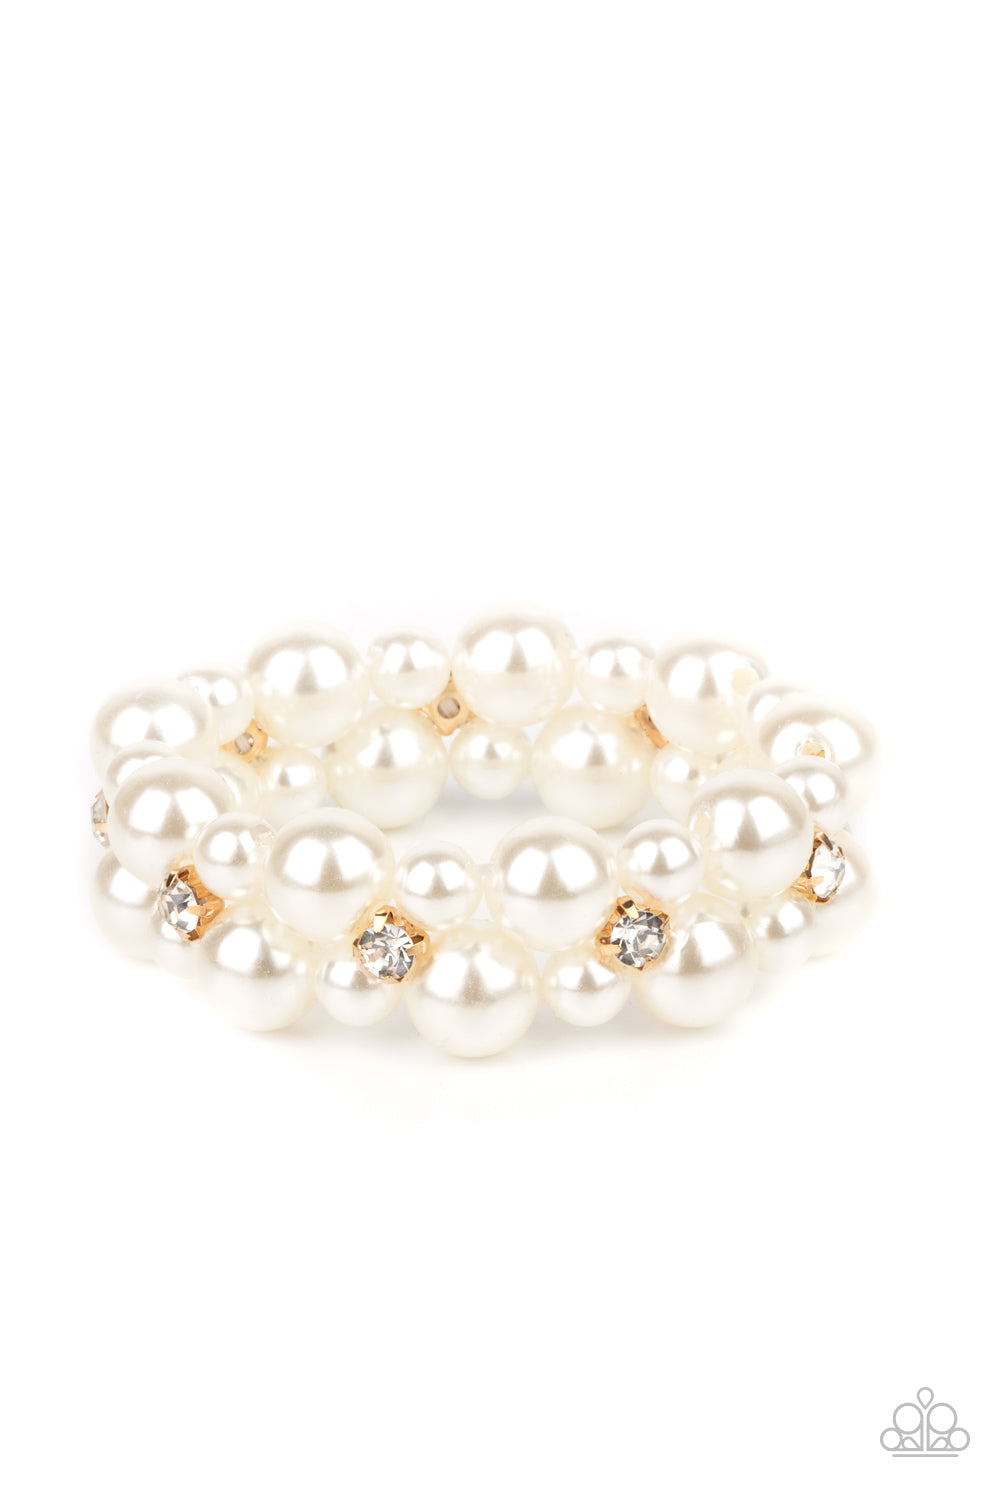 Flirt Alert - Gold and White Pearl - Stretchy Bracelet - Paparazzi Accessories - A bubbly collection of white pearls and classic white rhinestone encrusted gold frames are threaded along stretchy bands around the wrist, creating flirtatious refinement. Sold as one individual bracelet.